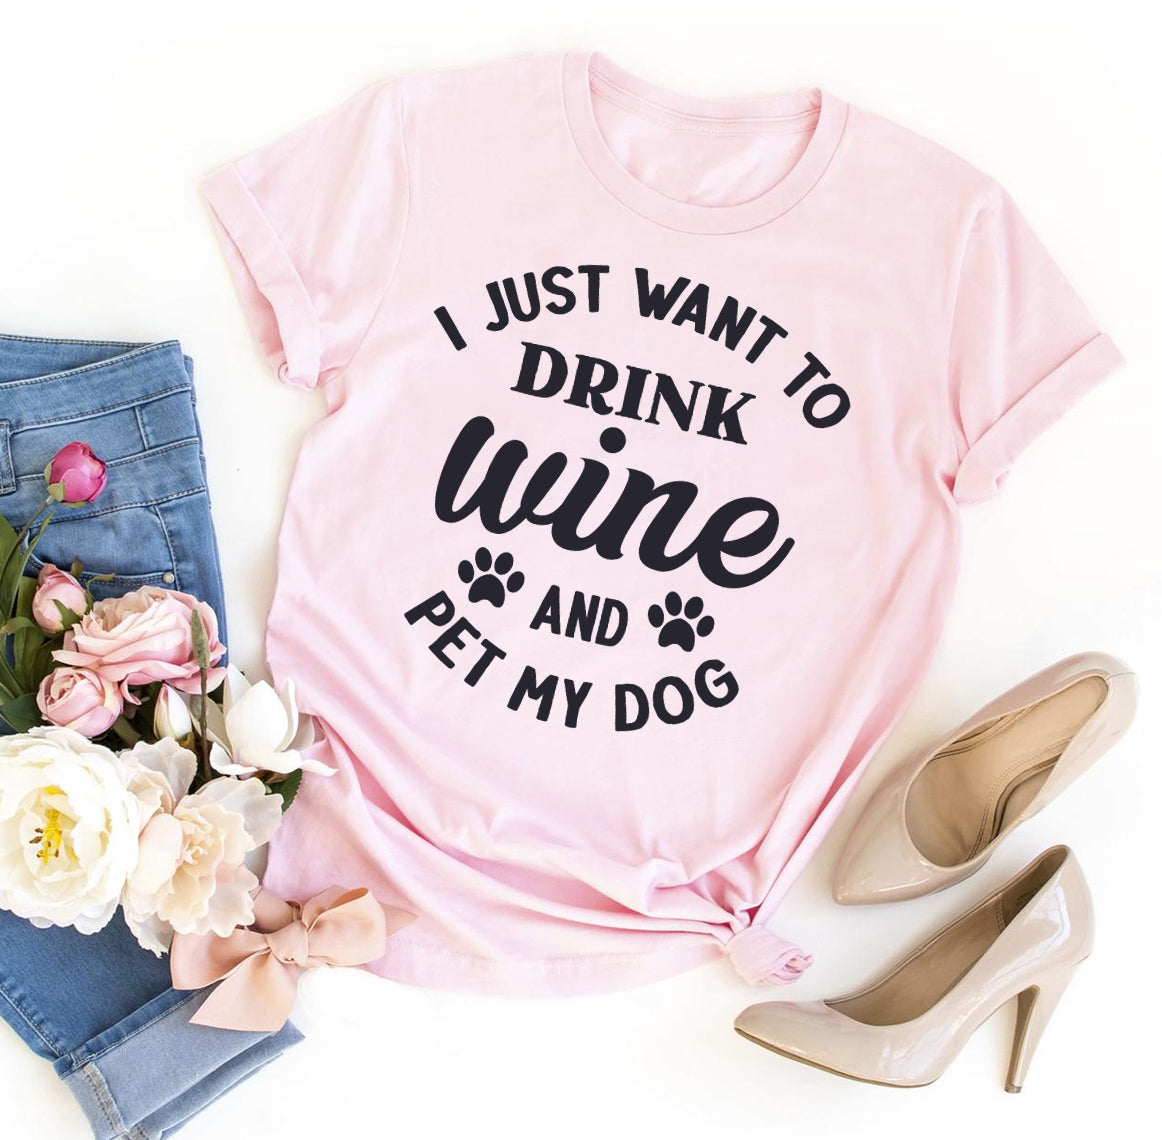 I Just Want To Drink Wine And Pet My Dog T-shirt - Lady Galore